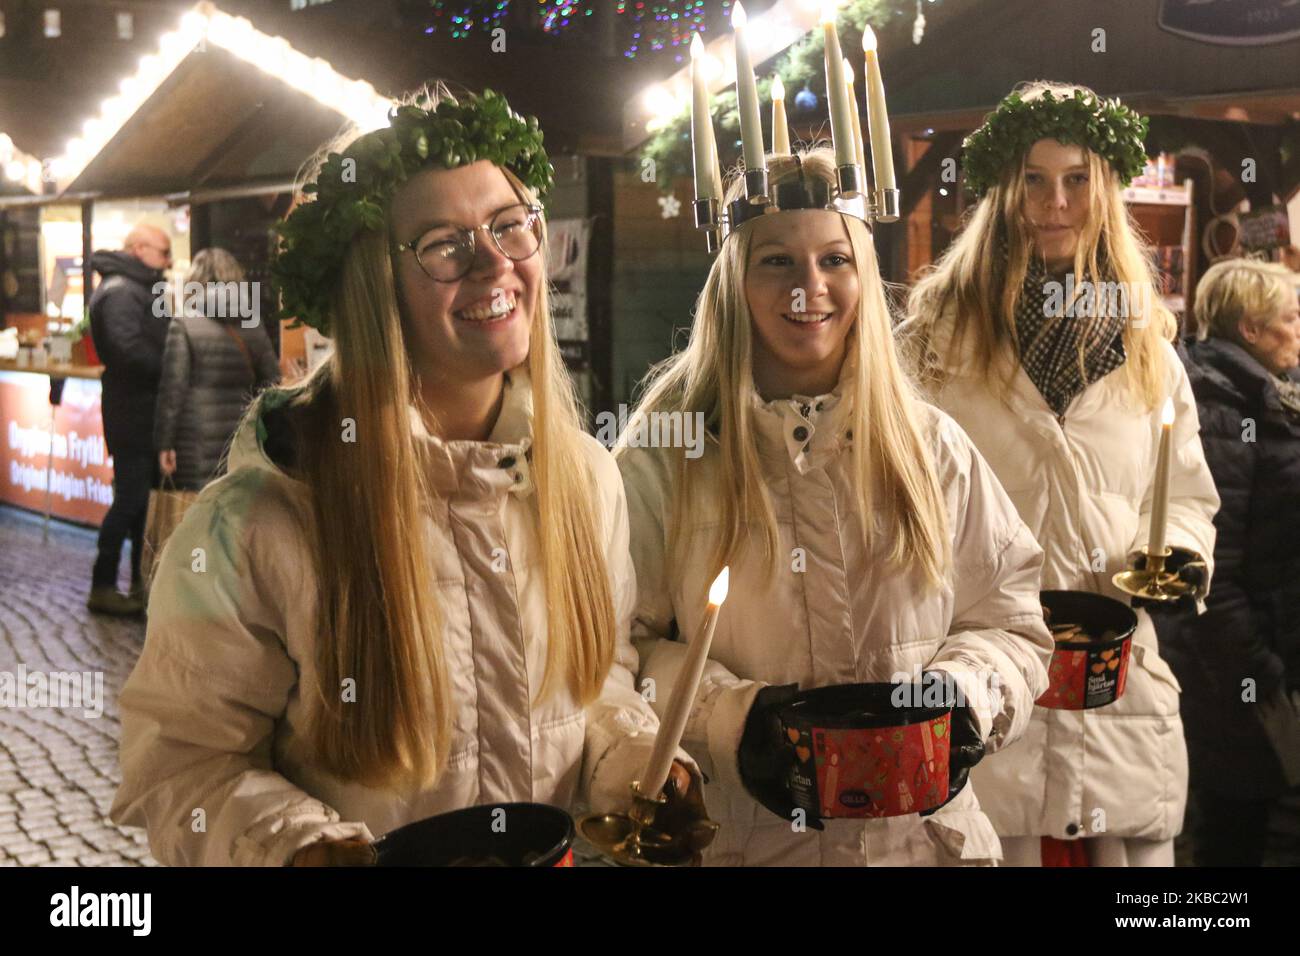 Young girls from Kalmar, Sweden dressed in a white dress and a red sash (as the symbol of martyrdom) carries candles in proccesion along the Gdansk Christmas Fair on the Old City centre area are seen in Gdansk, Poland on 2 December 2019 . One of them wears a crown of candles on her head. Girls dressed as Saint Lucy (Sankta Lucia) carry cookies in procession and sing a songs. It is said that to vividly celebrate St. Lucy's Day will help one live the long winter days with enough light. (Photo by Michal Fludra/NurPhoto) Stock Photo